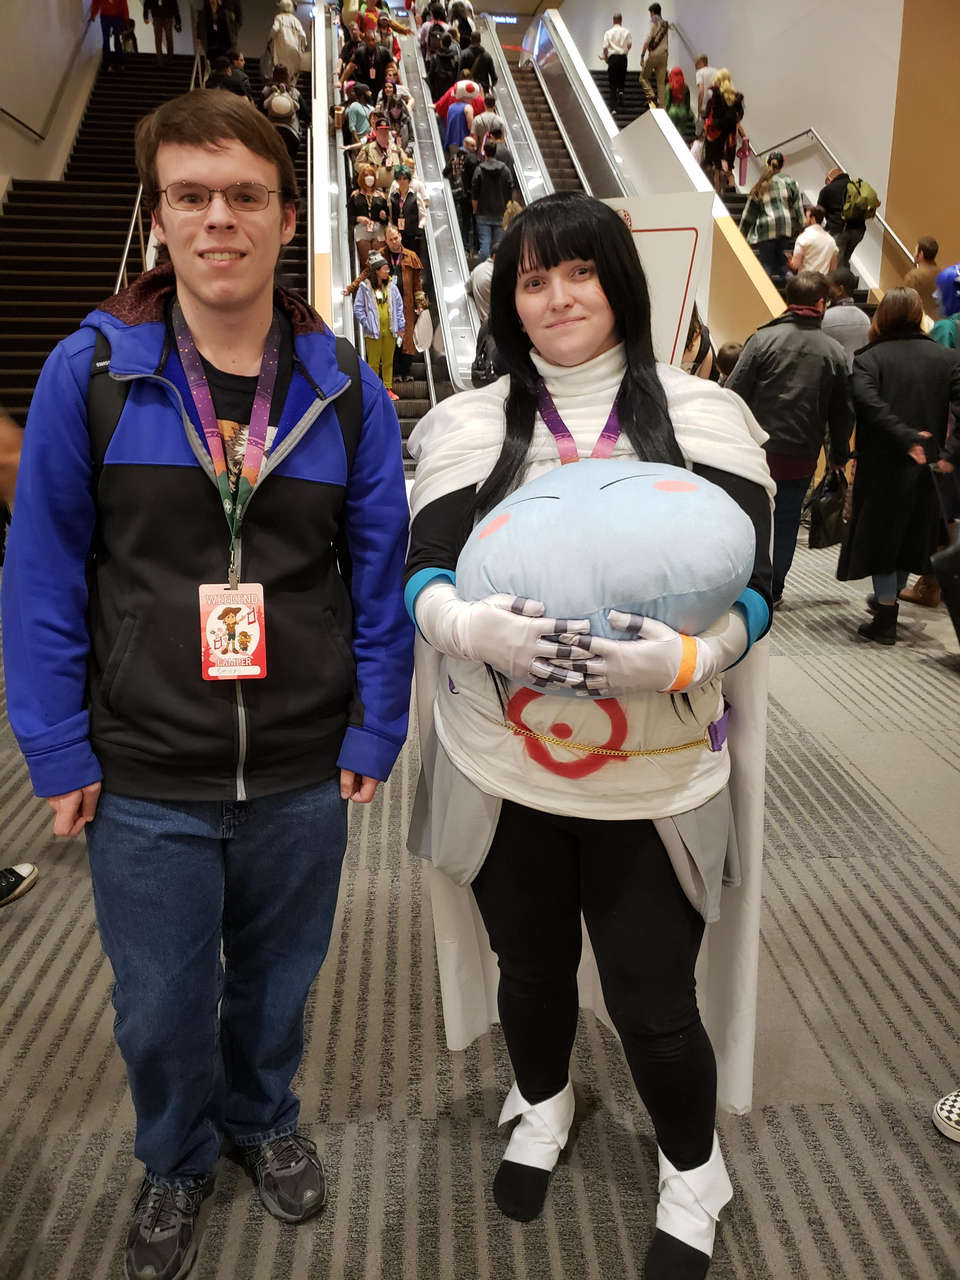 Saw This Great Cosplay At A Con Two Weeks Ago Had To Get A Pi